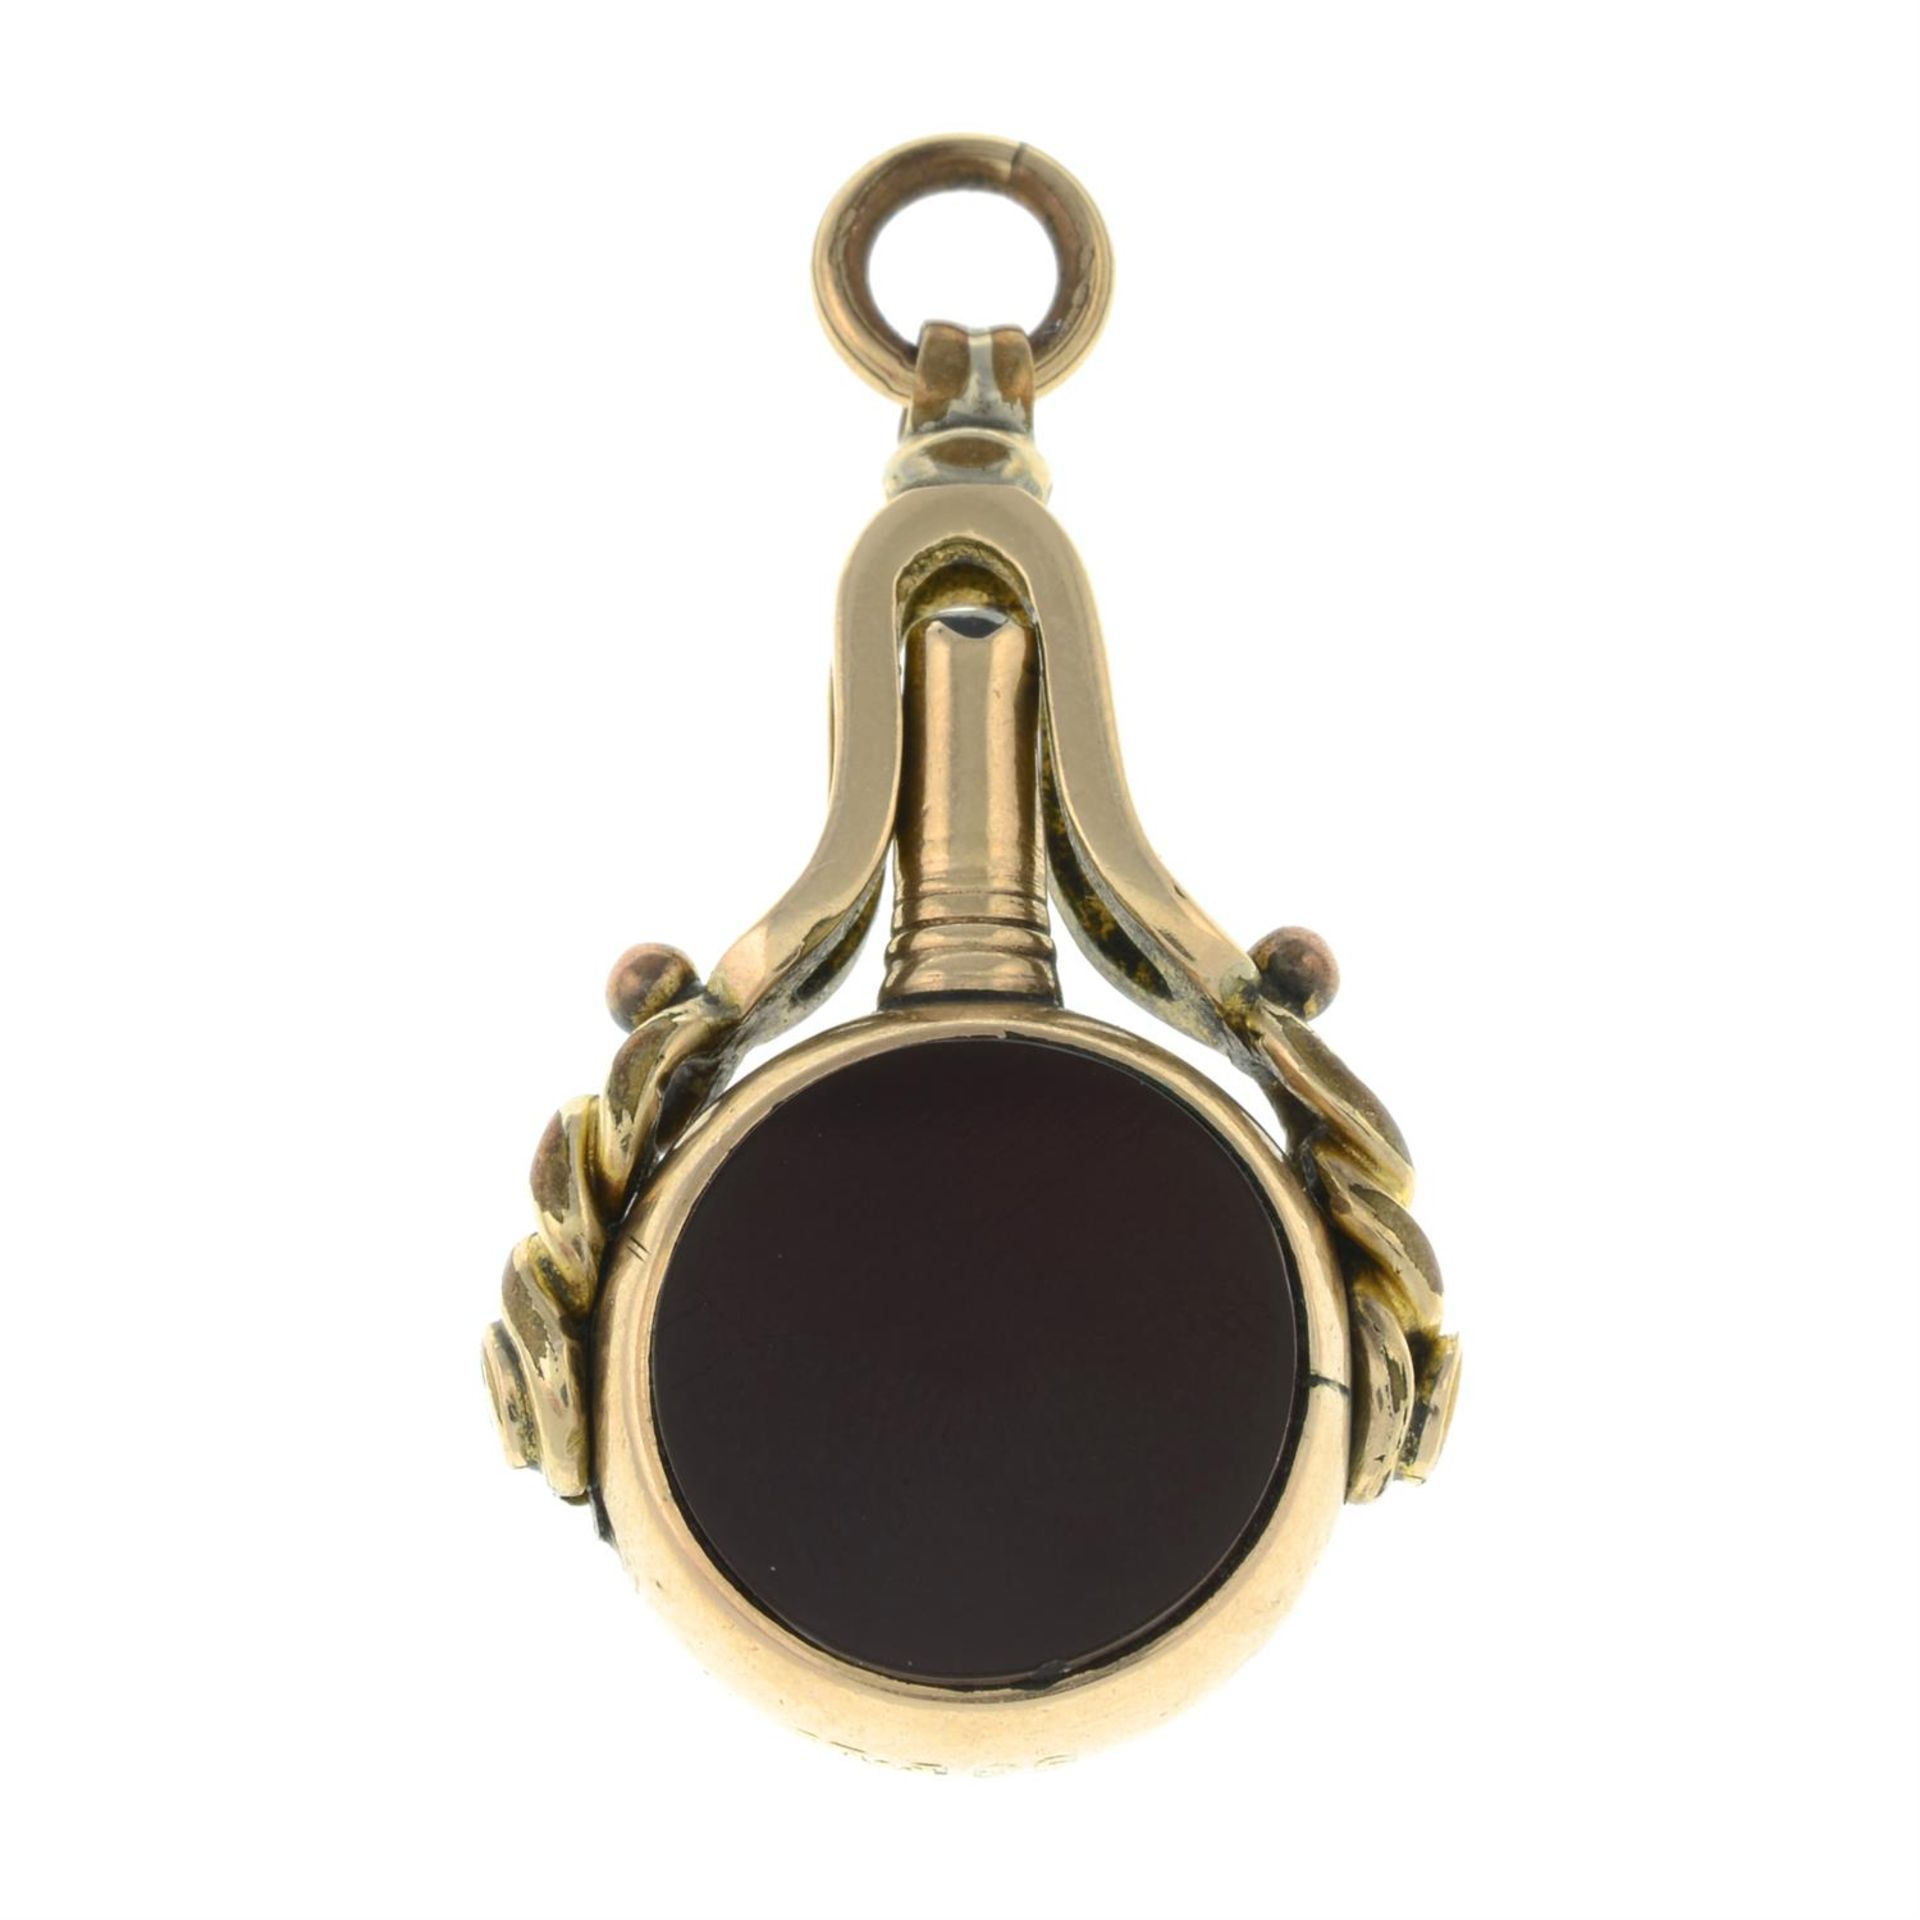 A late Victorian 9ct gold carnelian and bloodstone swivel fob watch key.